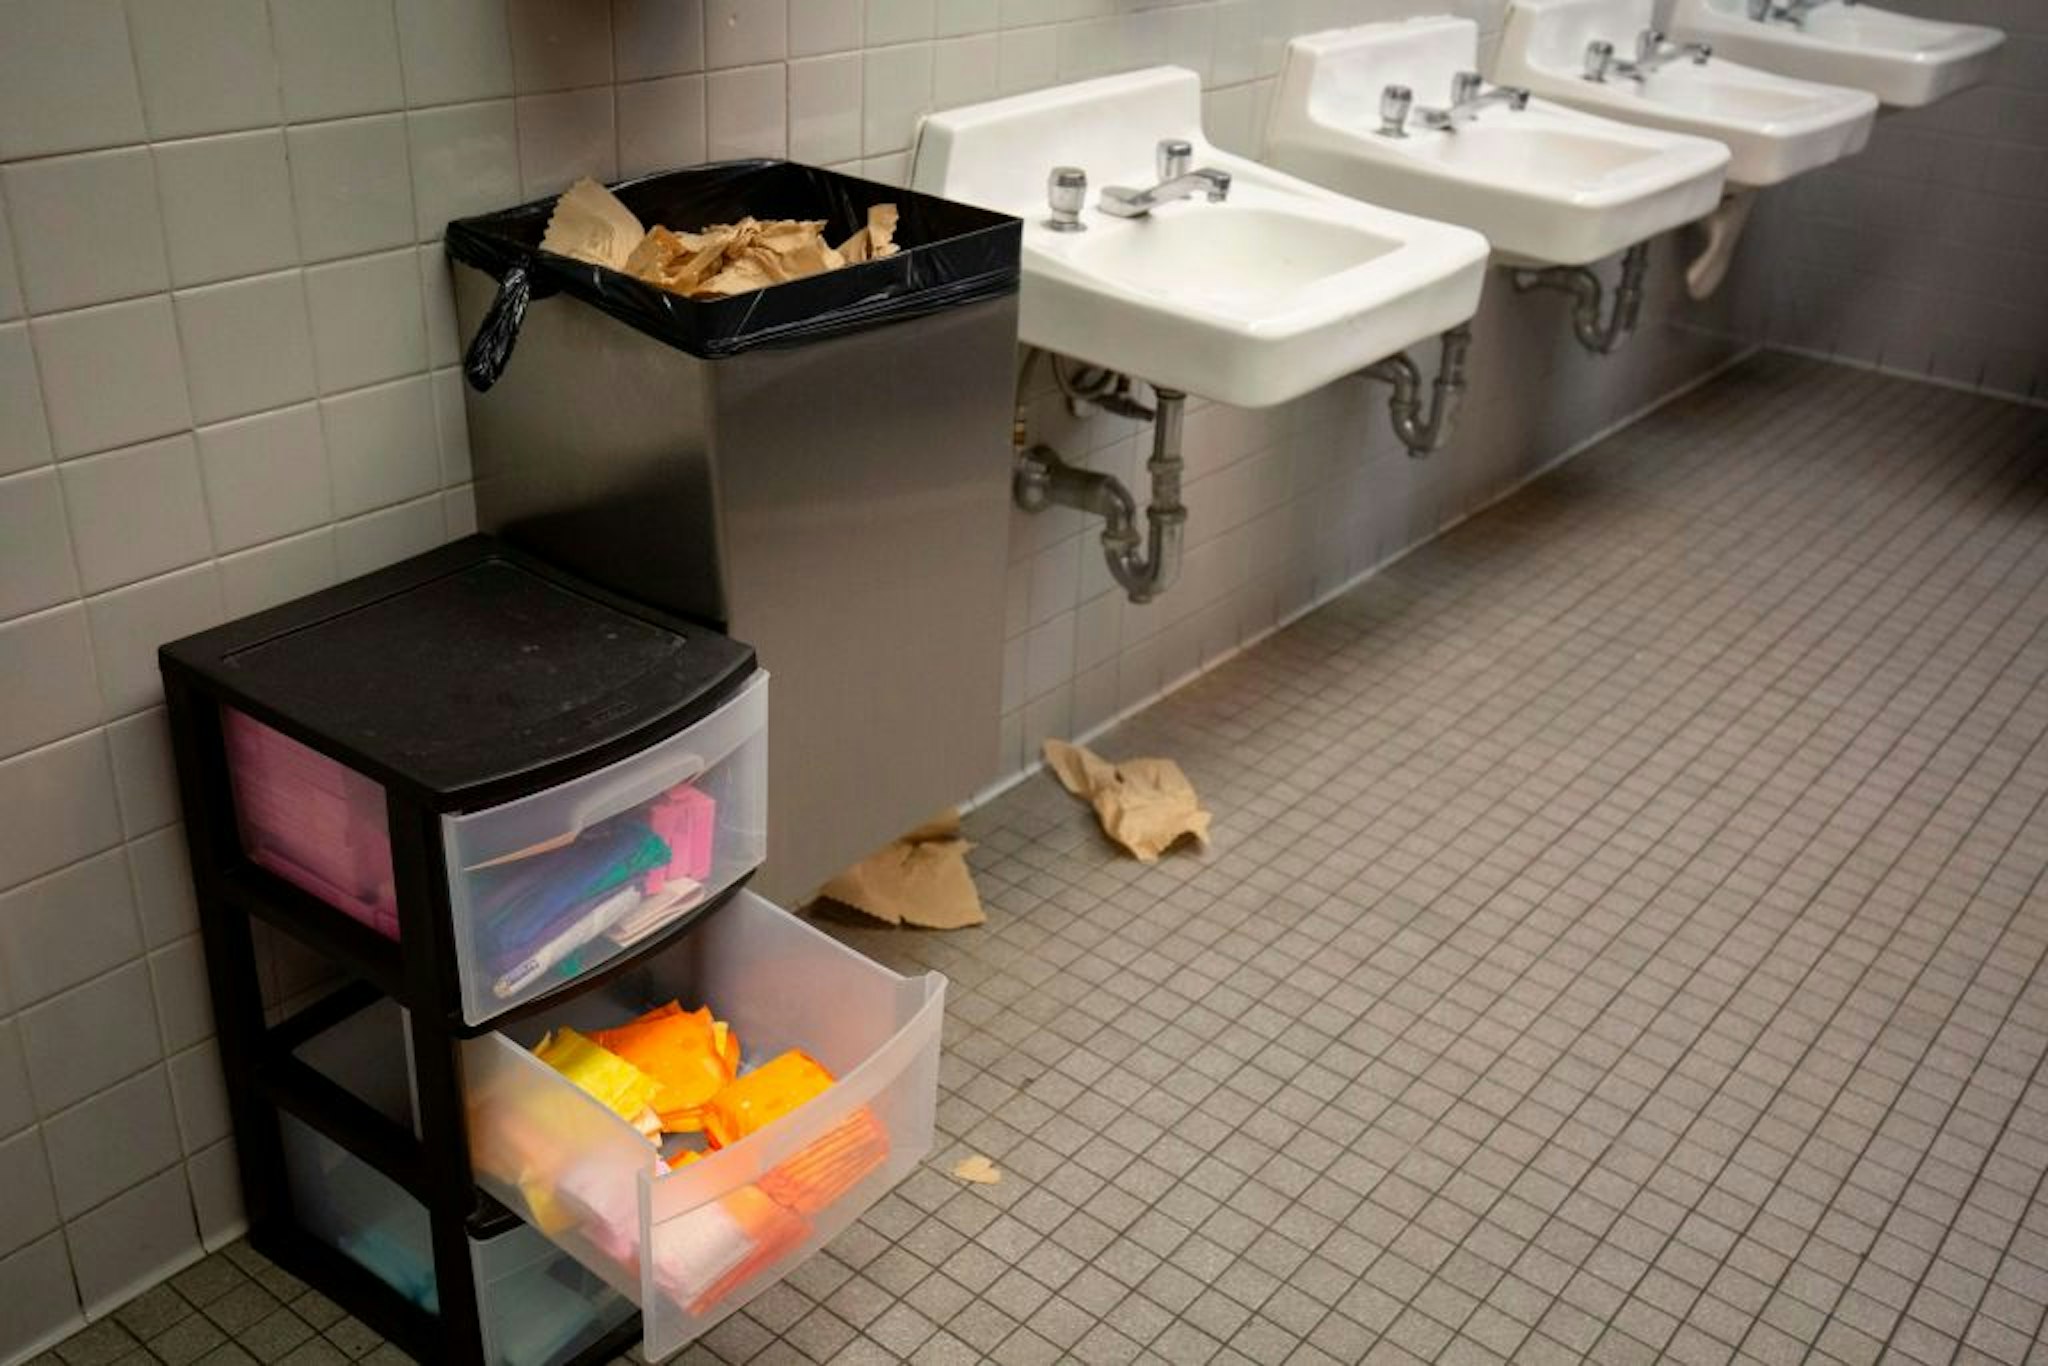 Free pads and tampons are seen in a bathroom at Justice High School in Falls Church, Virginia, on September 11, 2019.